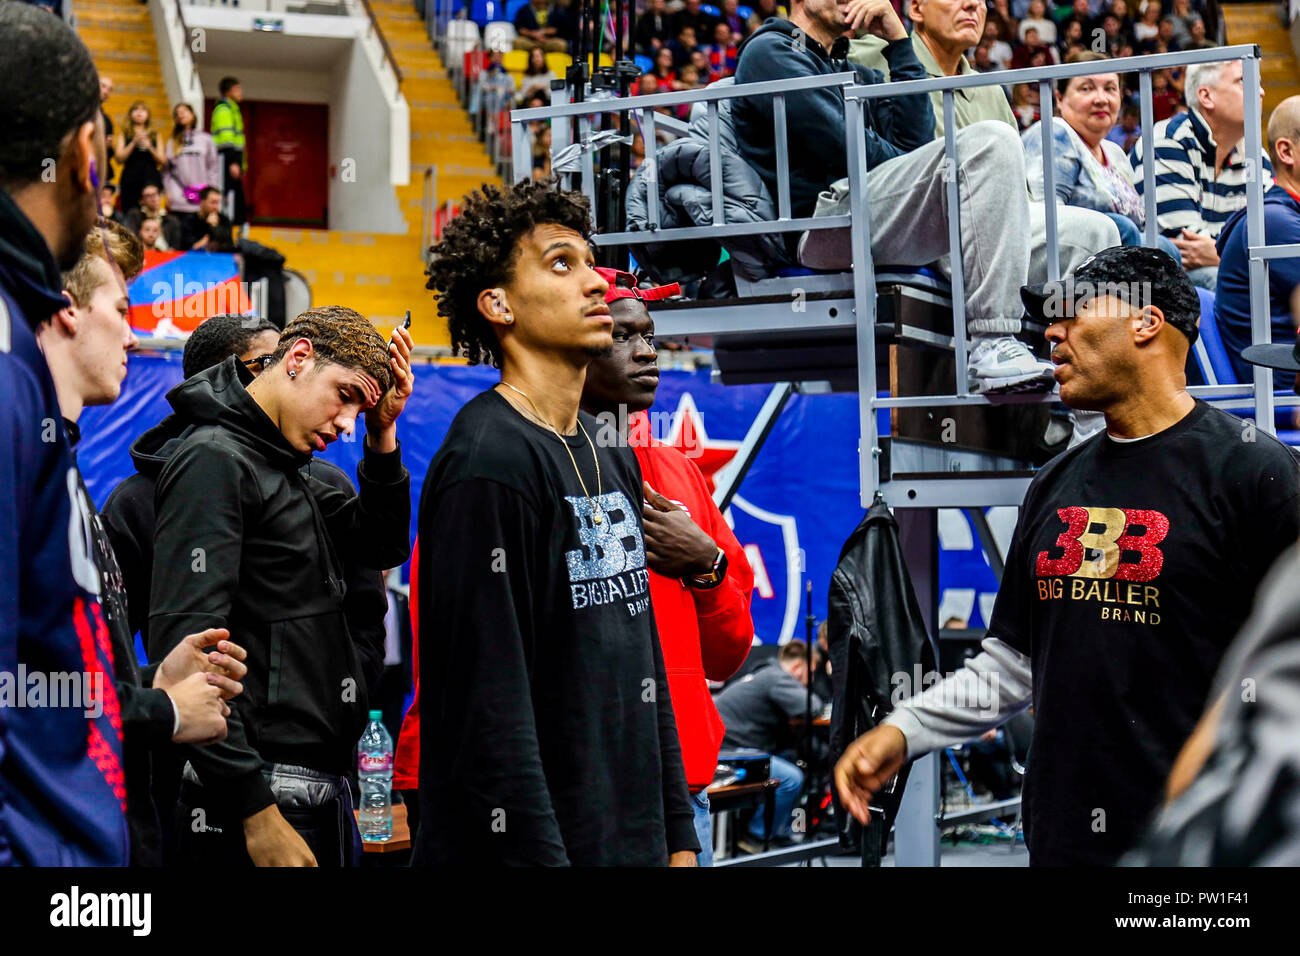 Lavar Ball, father of Los Angeles Lake guard Lonzo Ball, presents a framed  shirt of Big Baller Brand to CSKA Moscow after his team played CSKA  Moscow-2 the previous day as part